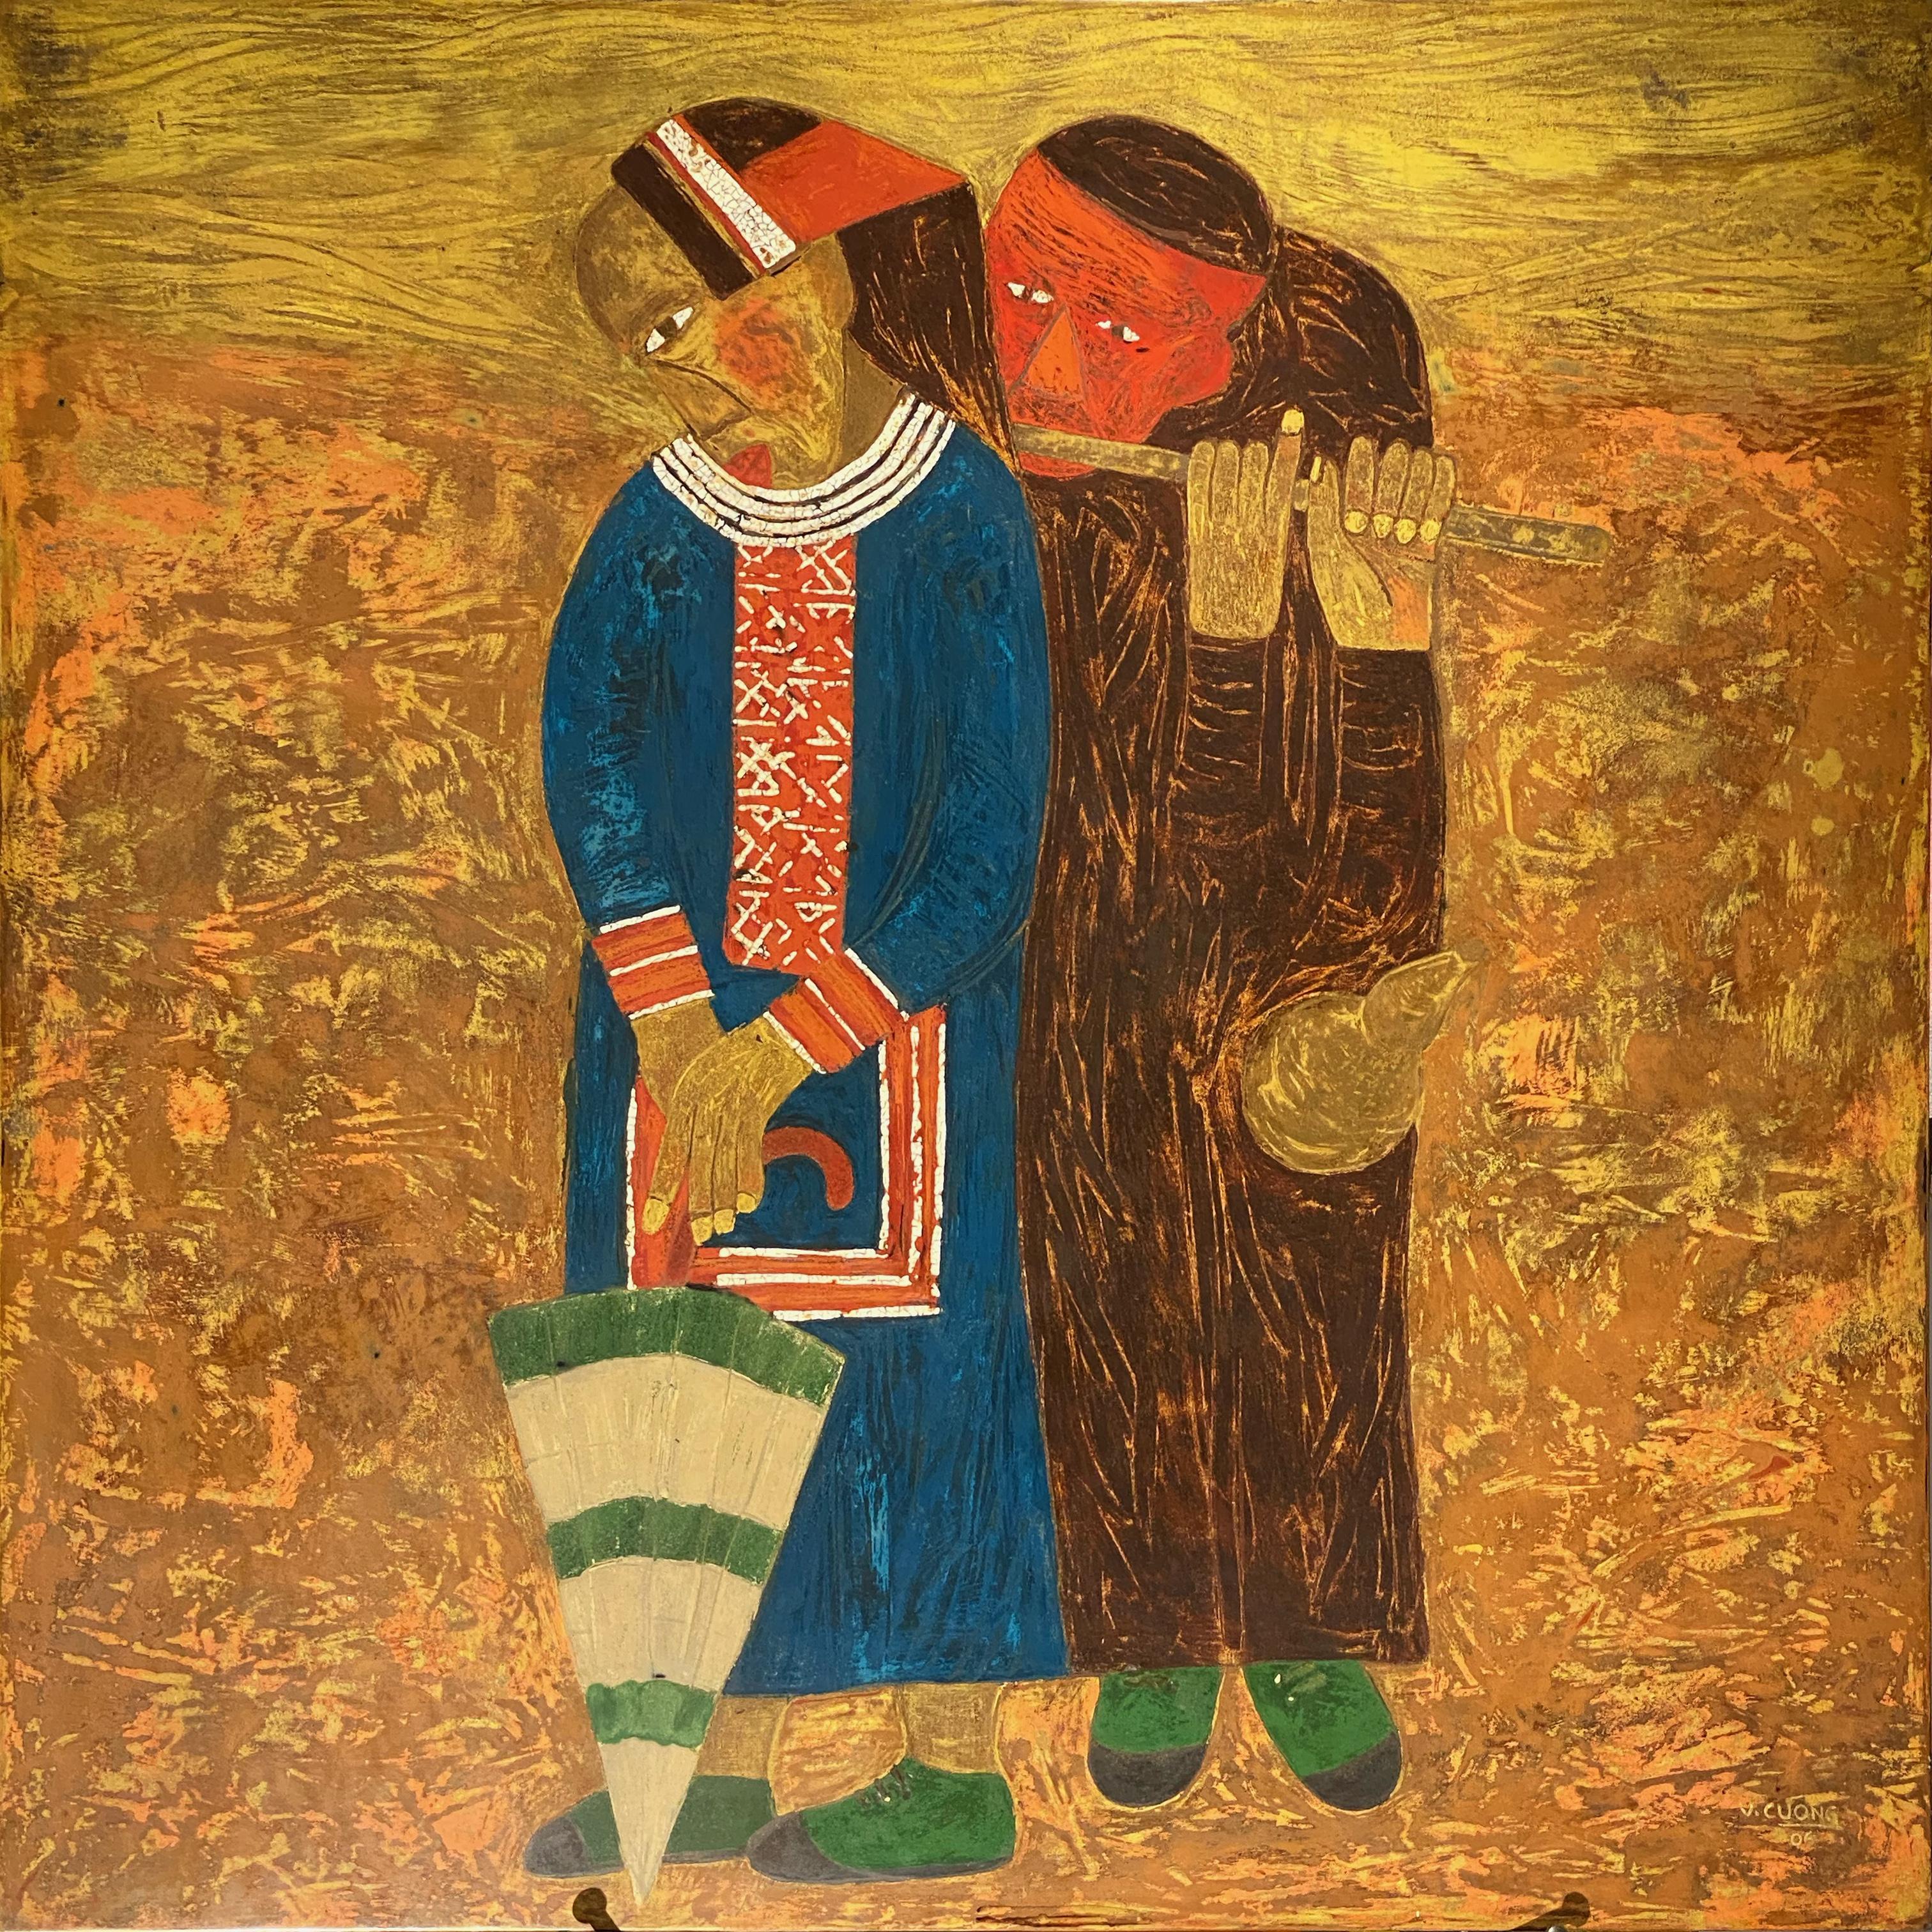 Vu Cuong Figurative Painting - 'Serenade' Lacquer on Wood Figurative Portrait of Couple